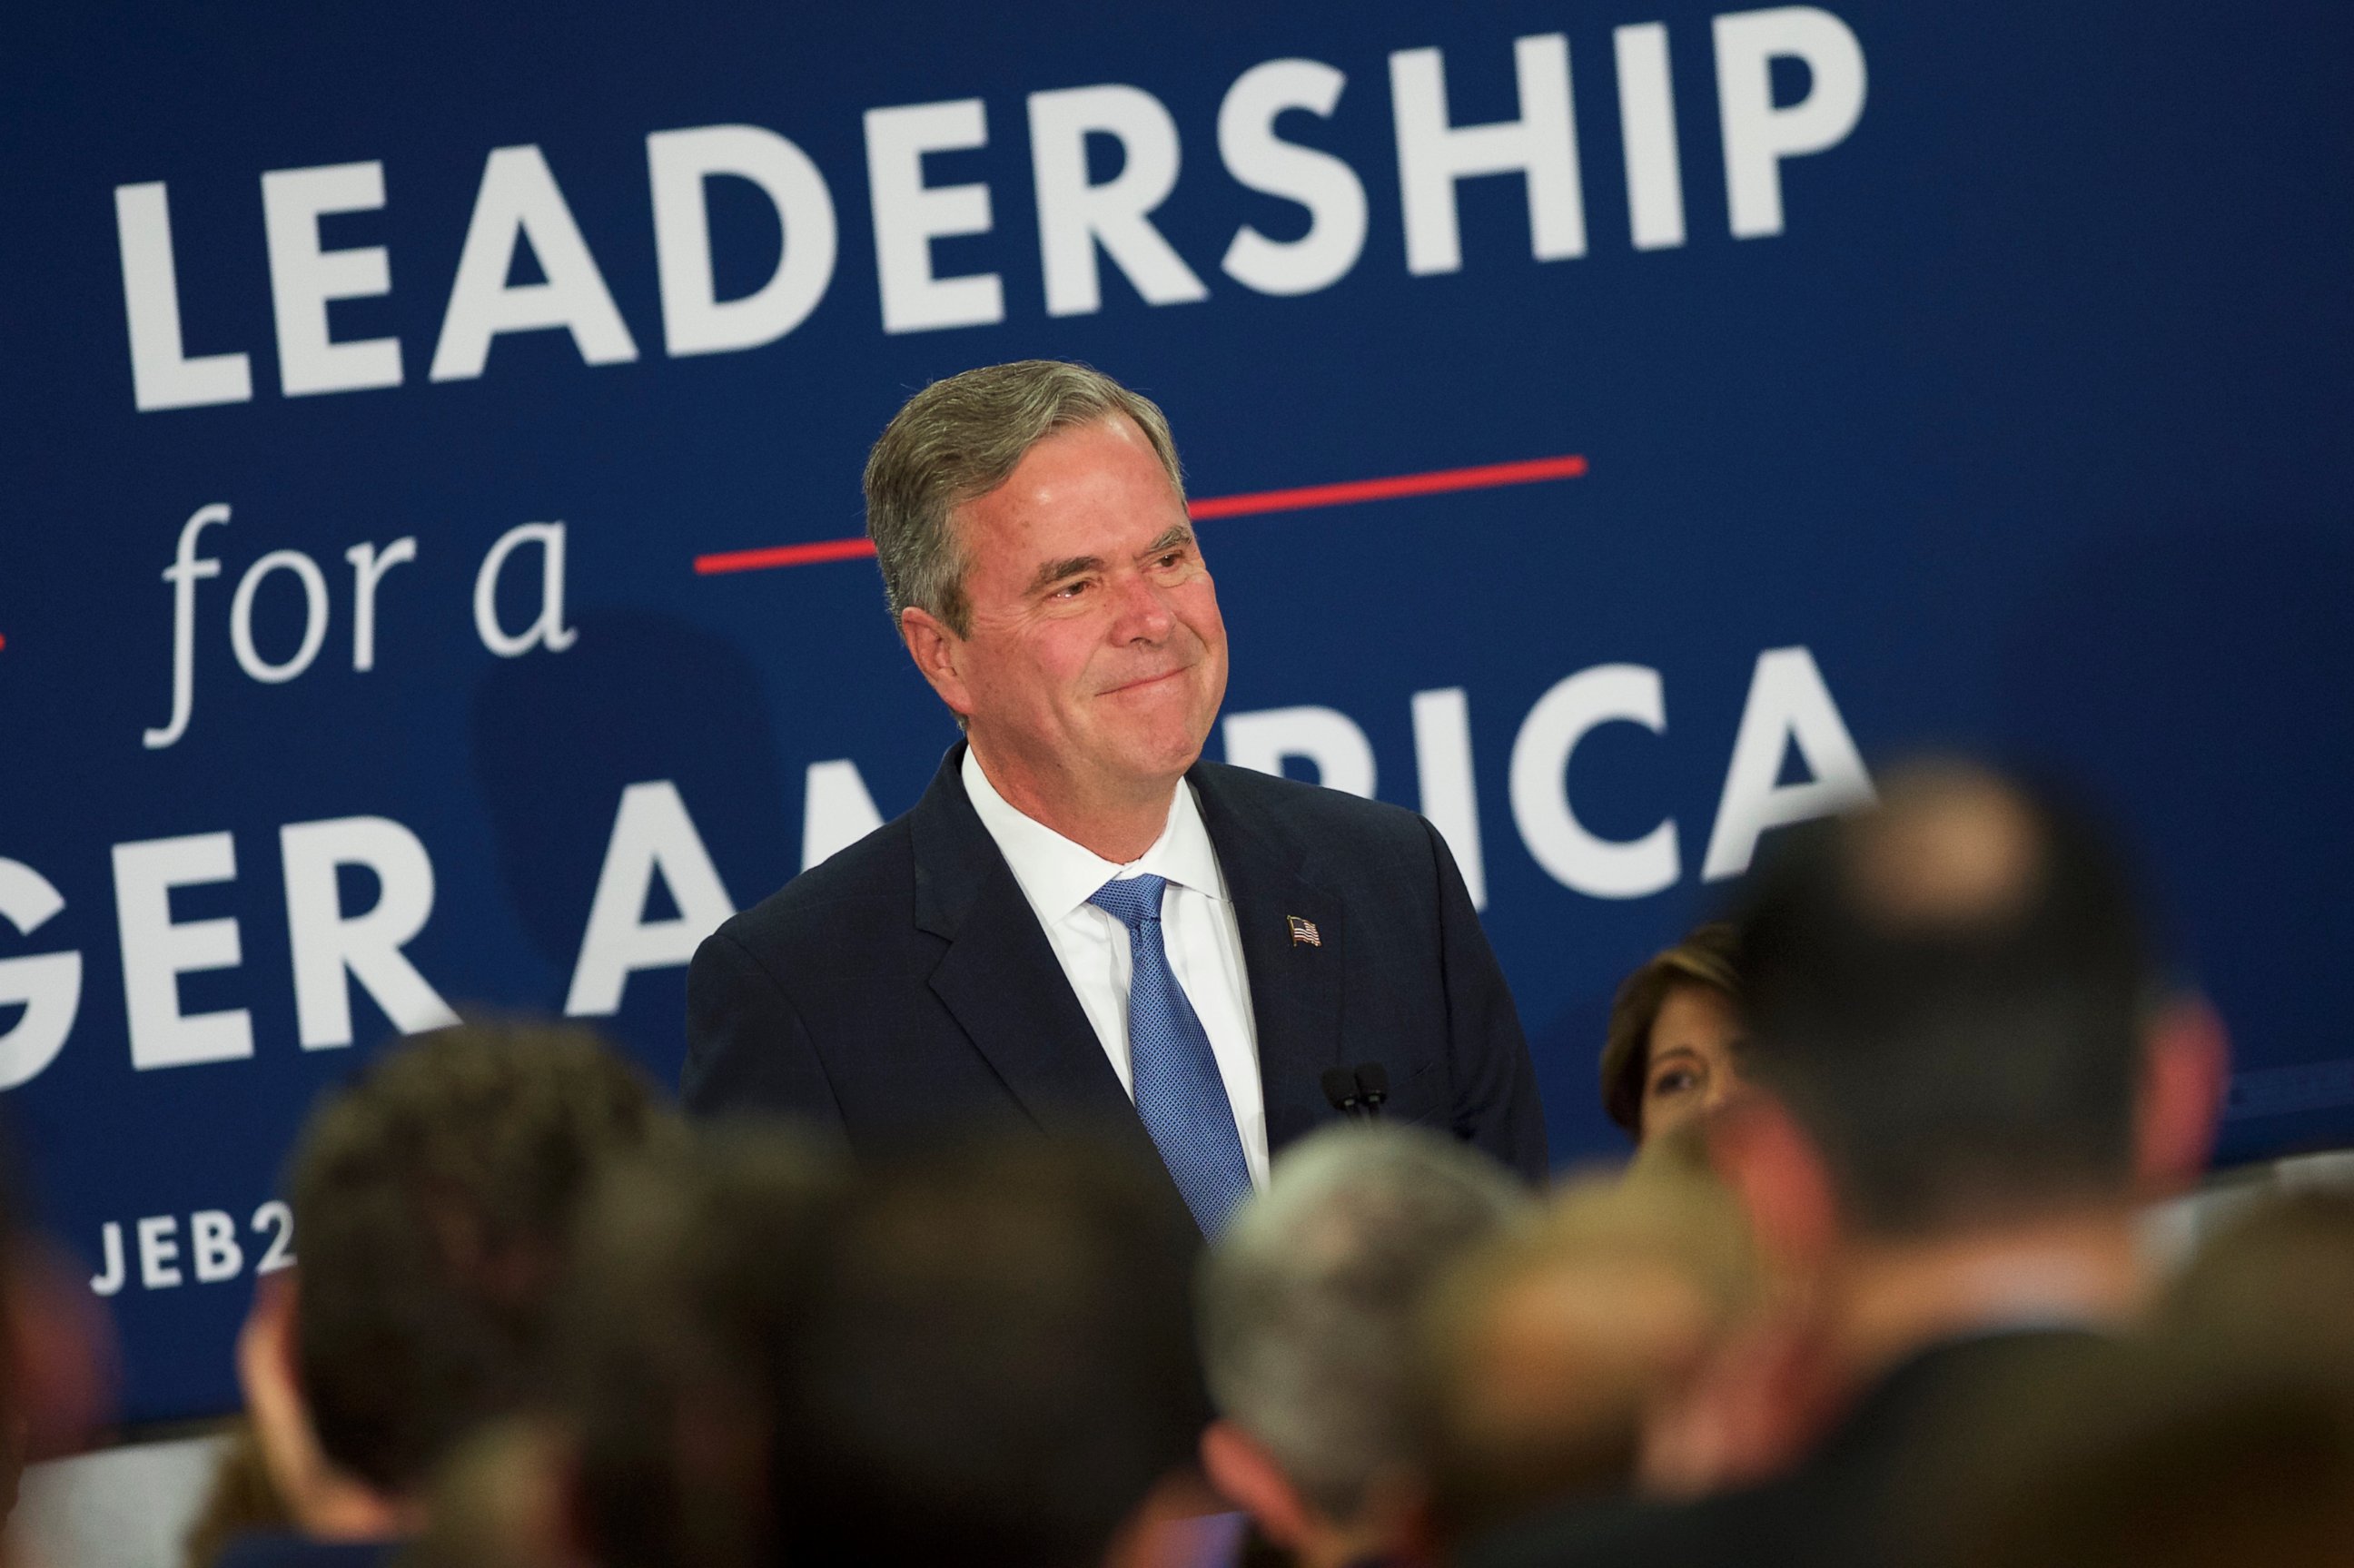 PHOTO: Jeb Bush reacts as he announces the suspension of his presidential campaign at an election night party at the Hilton Columbia Center in Columbia, S.C., Feb. 20, 2016.  